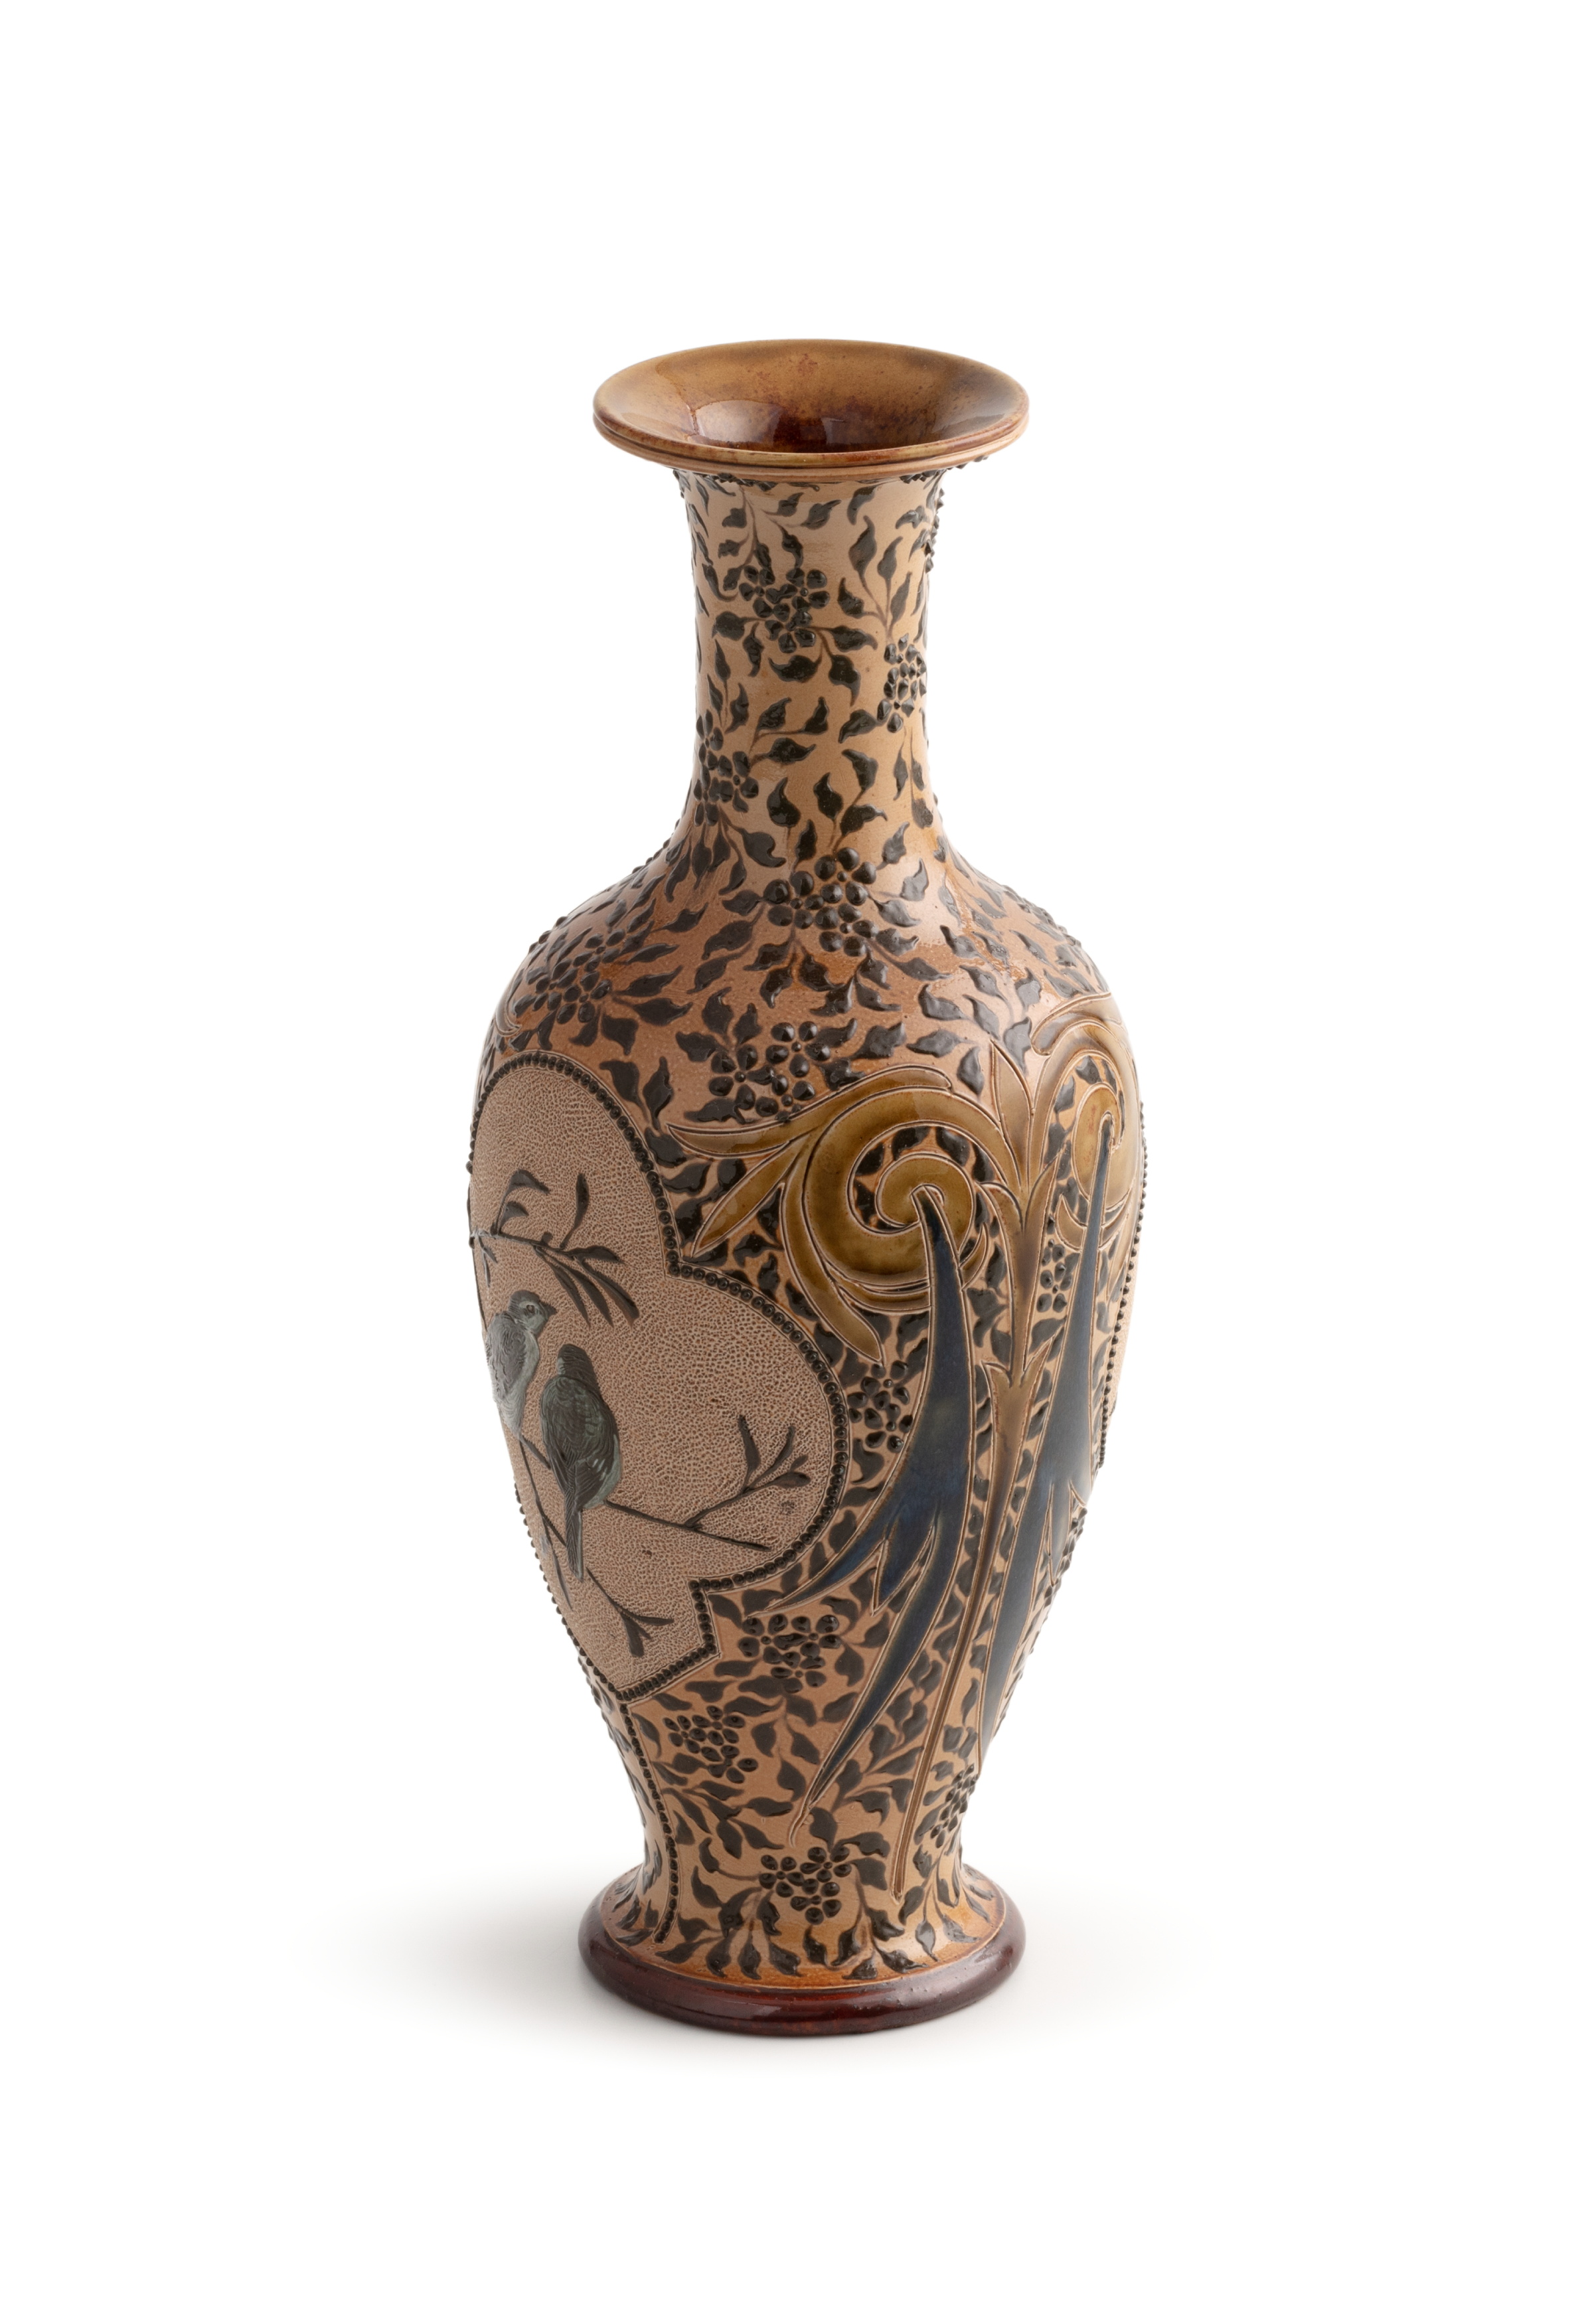 Stoneware vase by Doulton decorated by Florence E Barlow